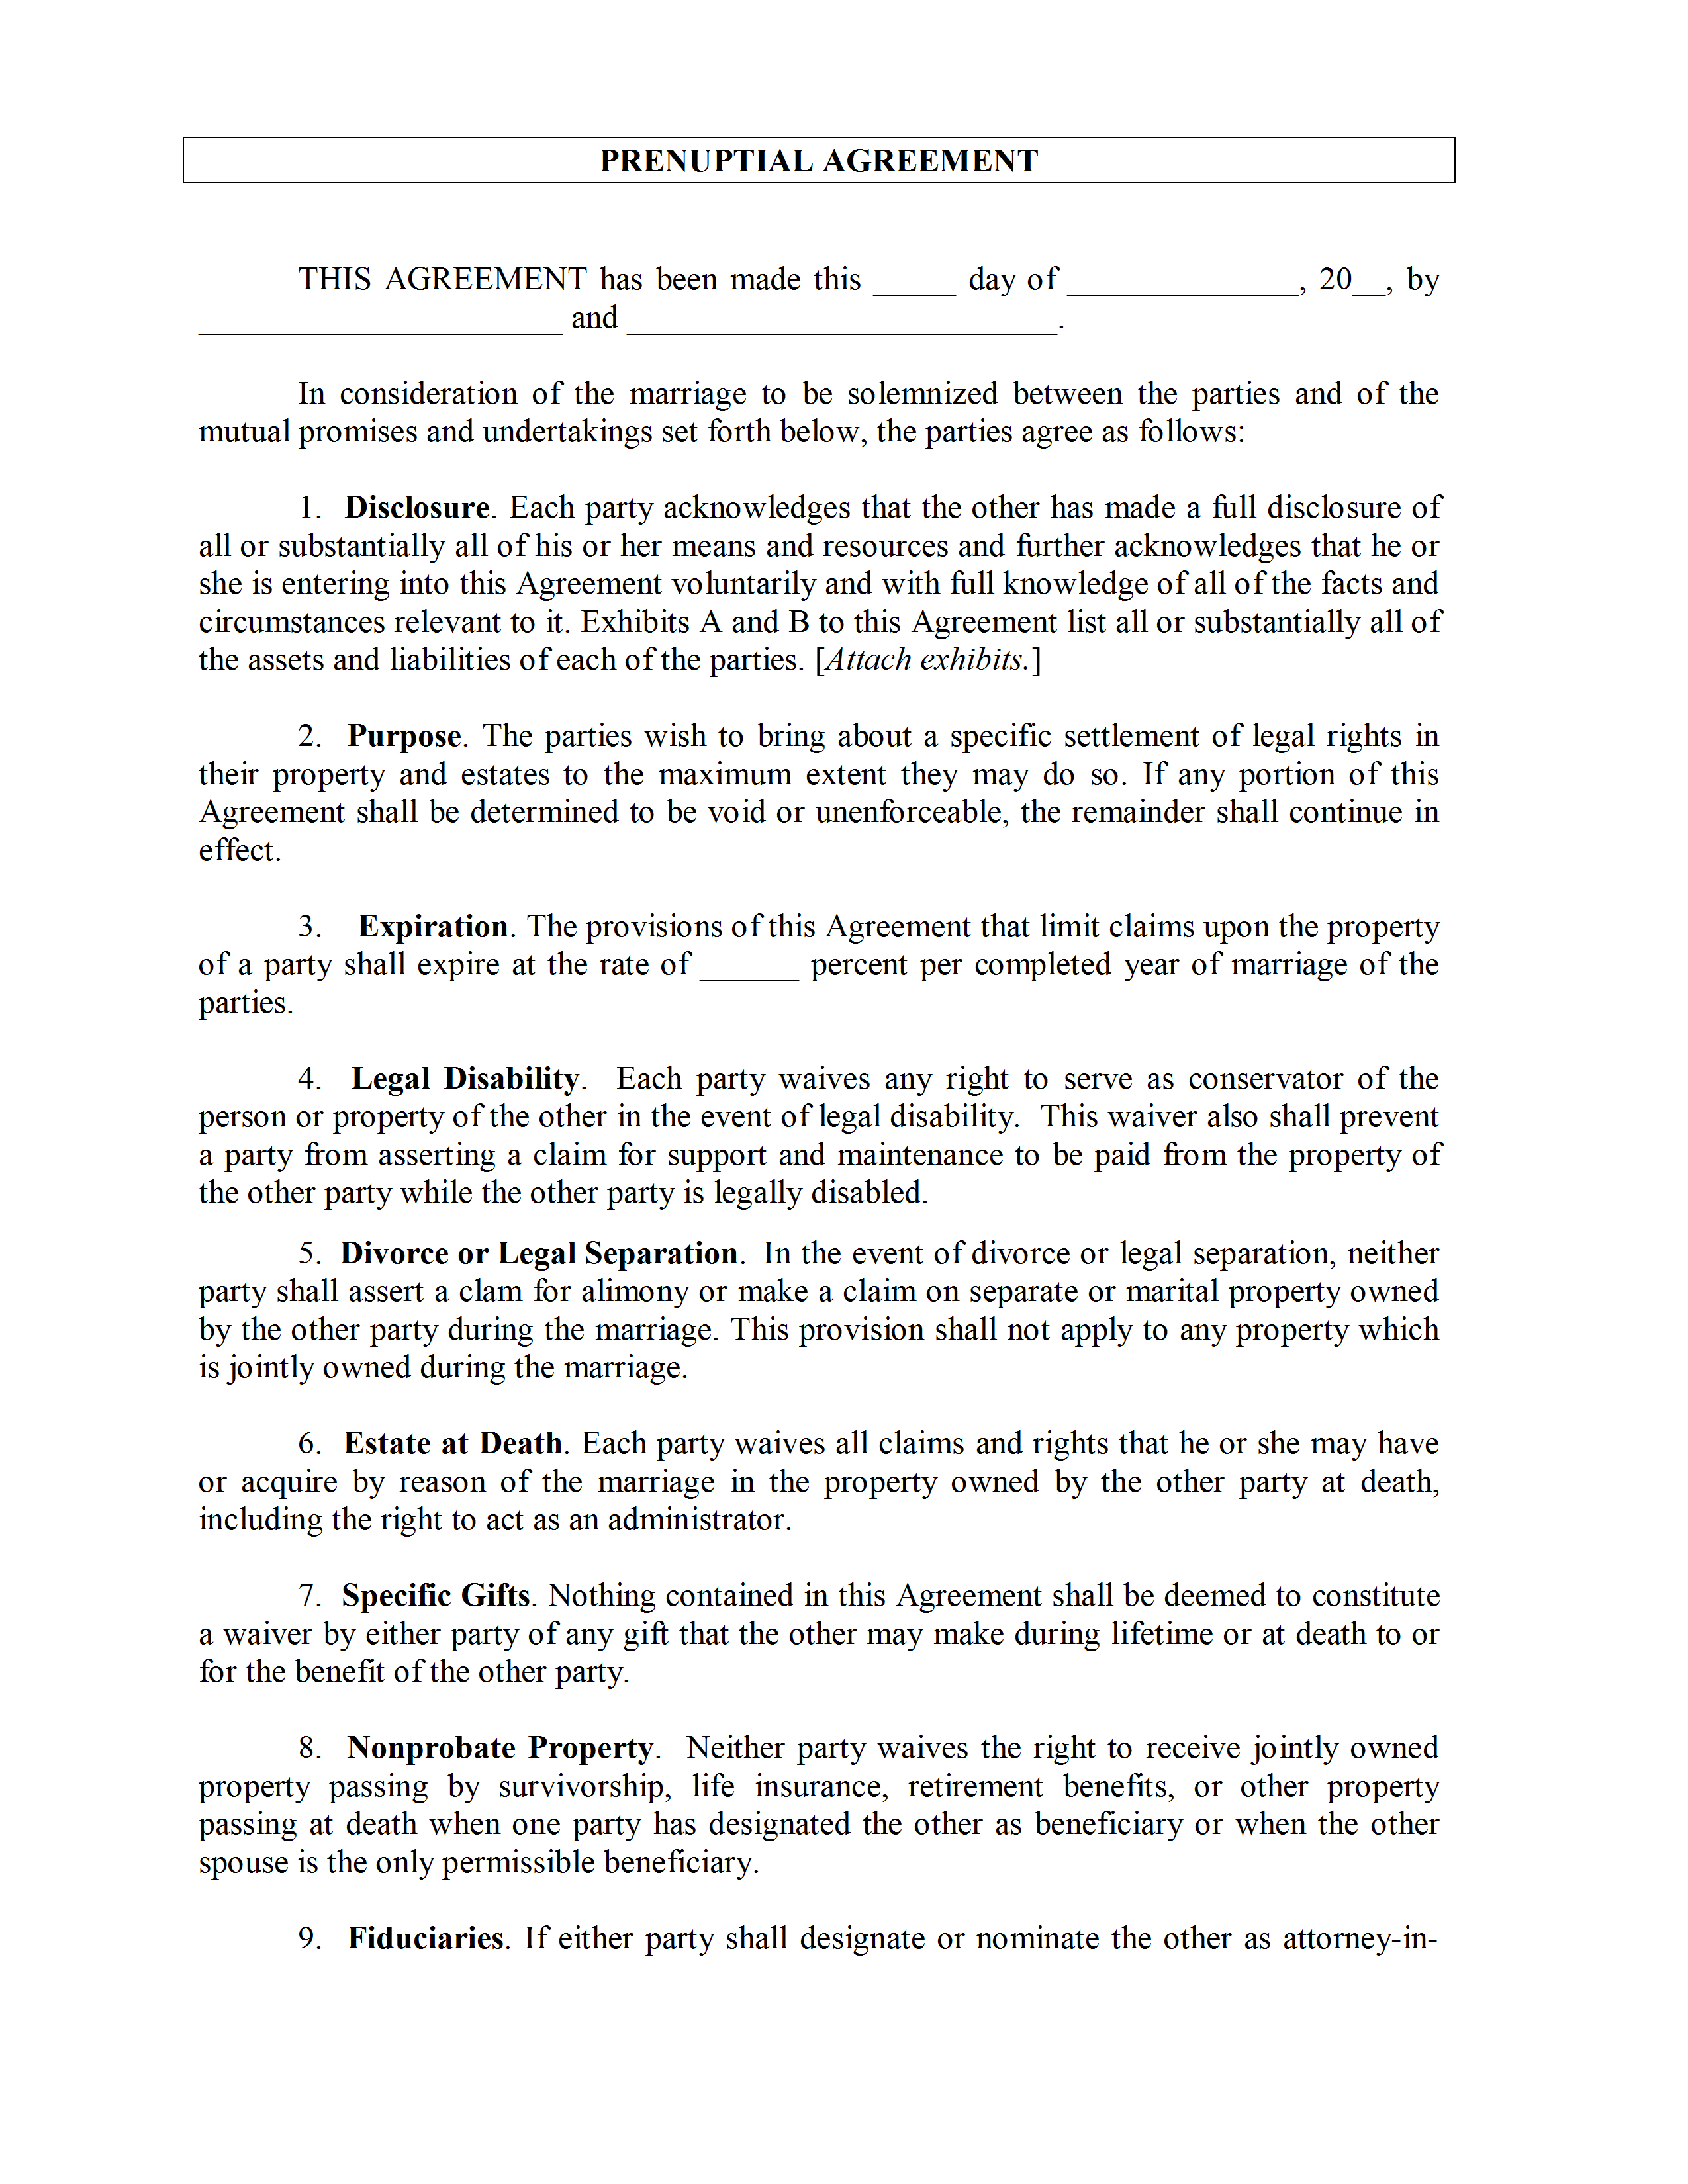 Marriage Termination Agreement Prenuptial Agreement Template